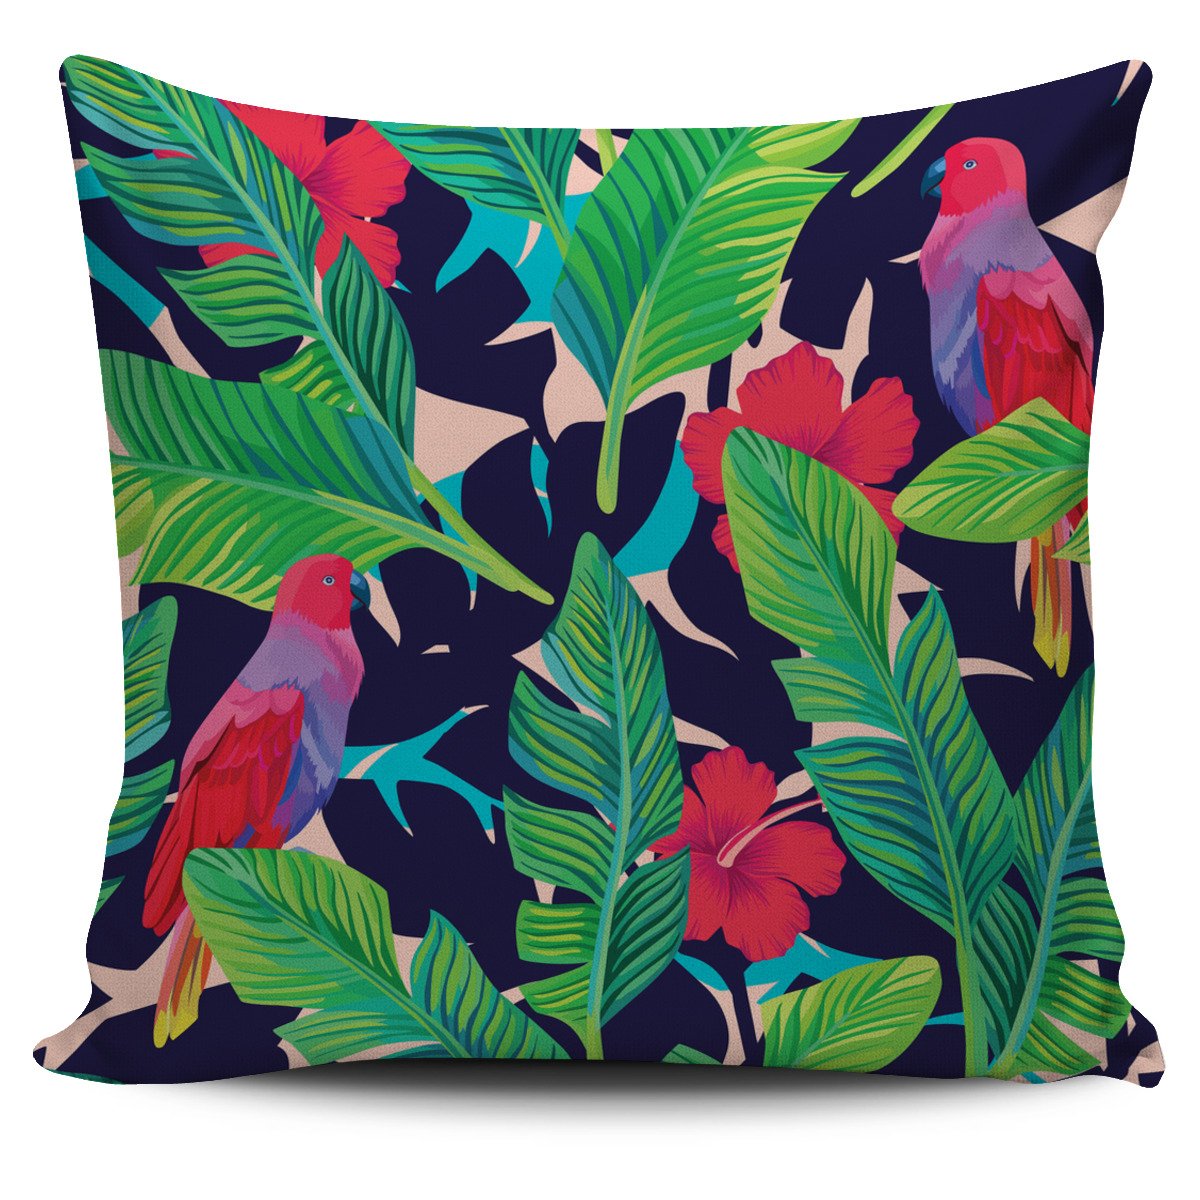 Parrot Banana Leaf Hawaii Pattern Print Pillow Cover